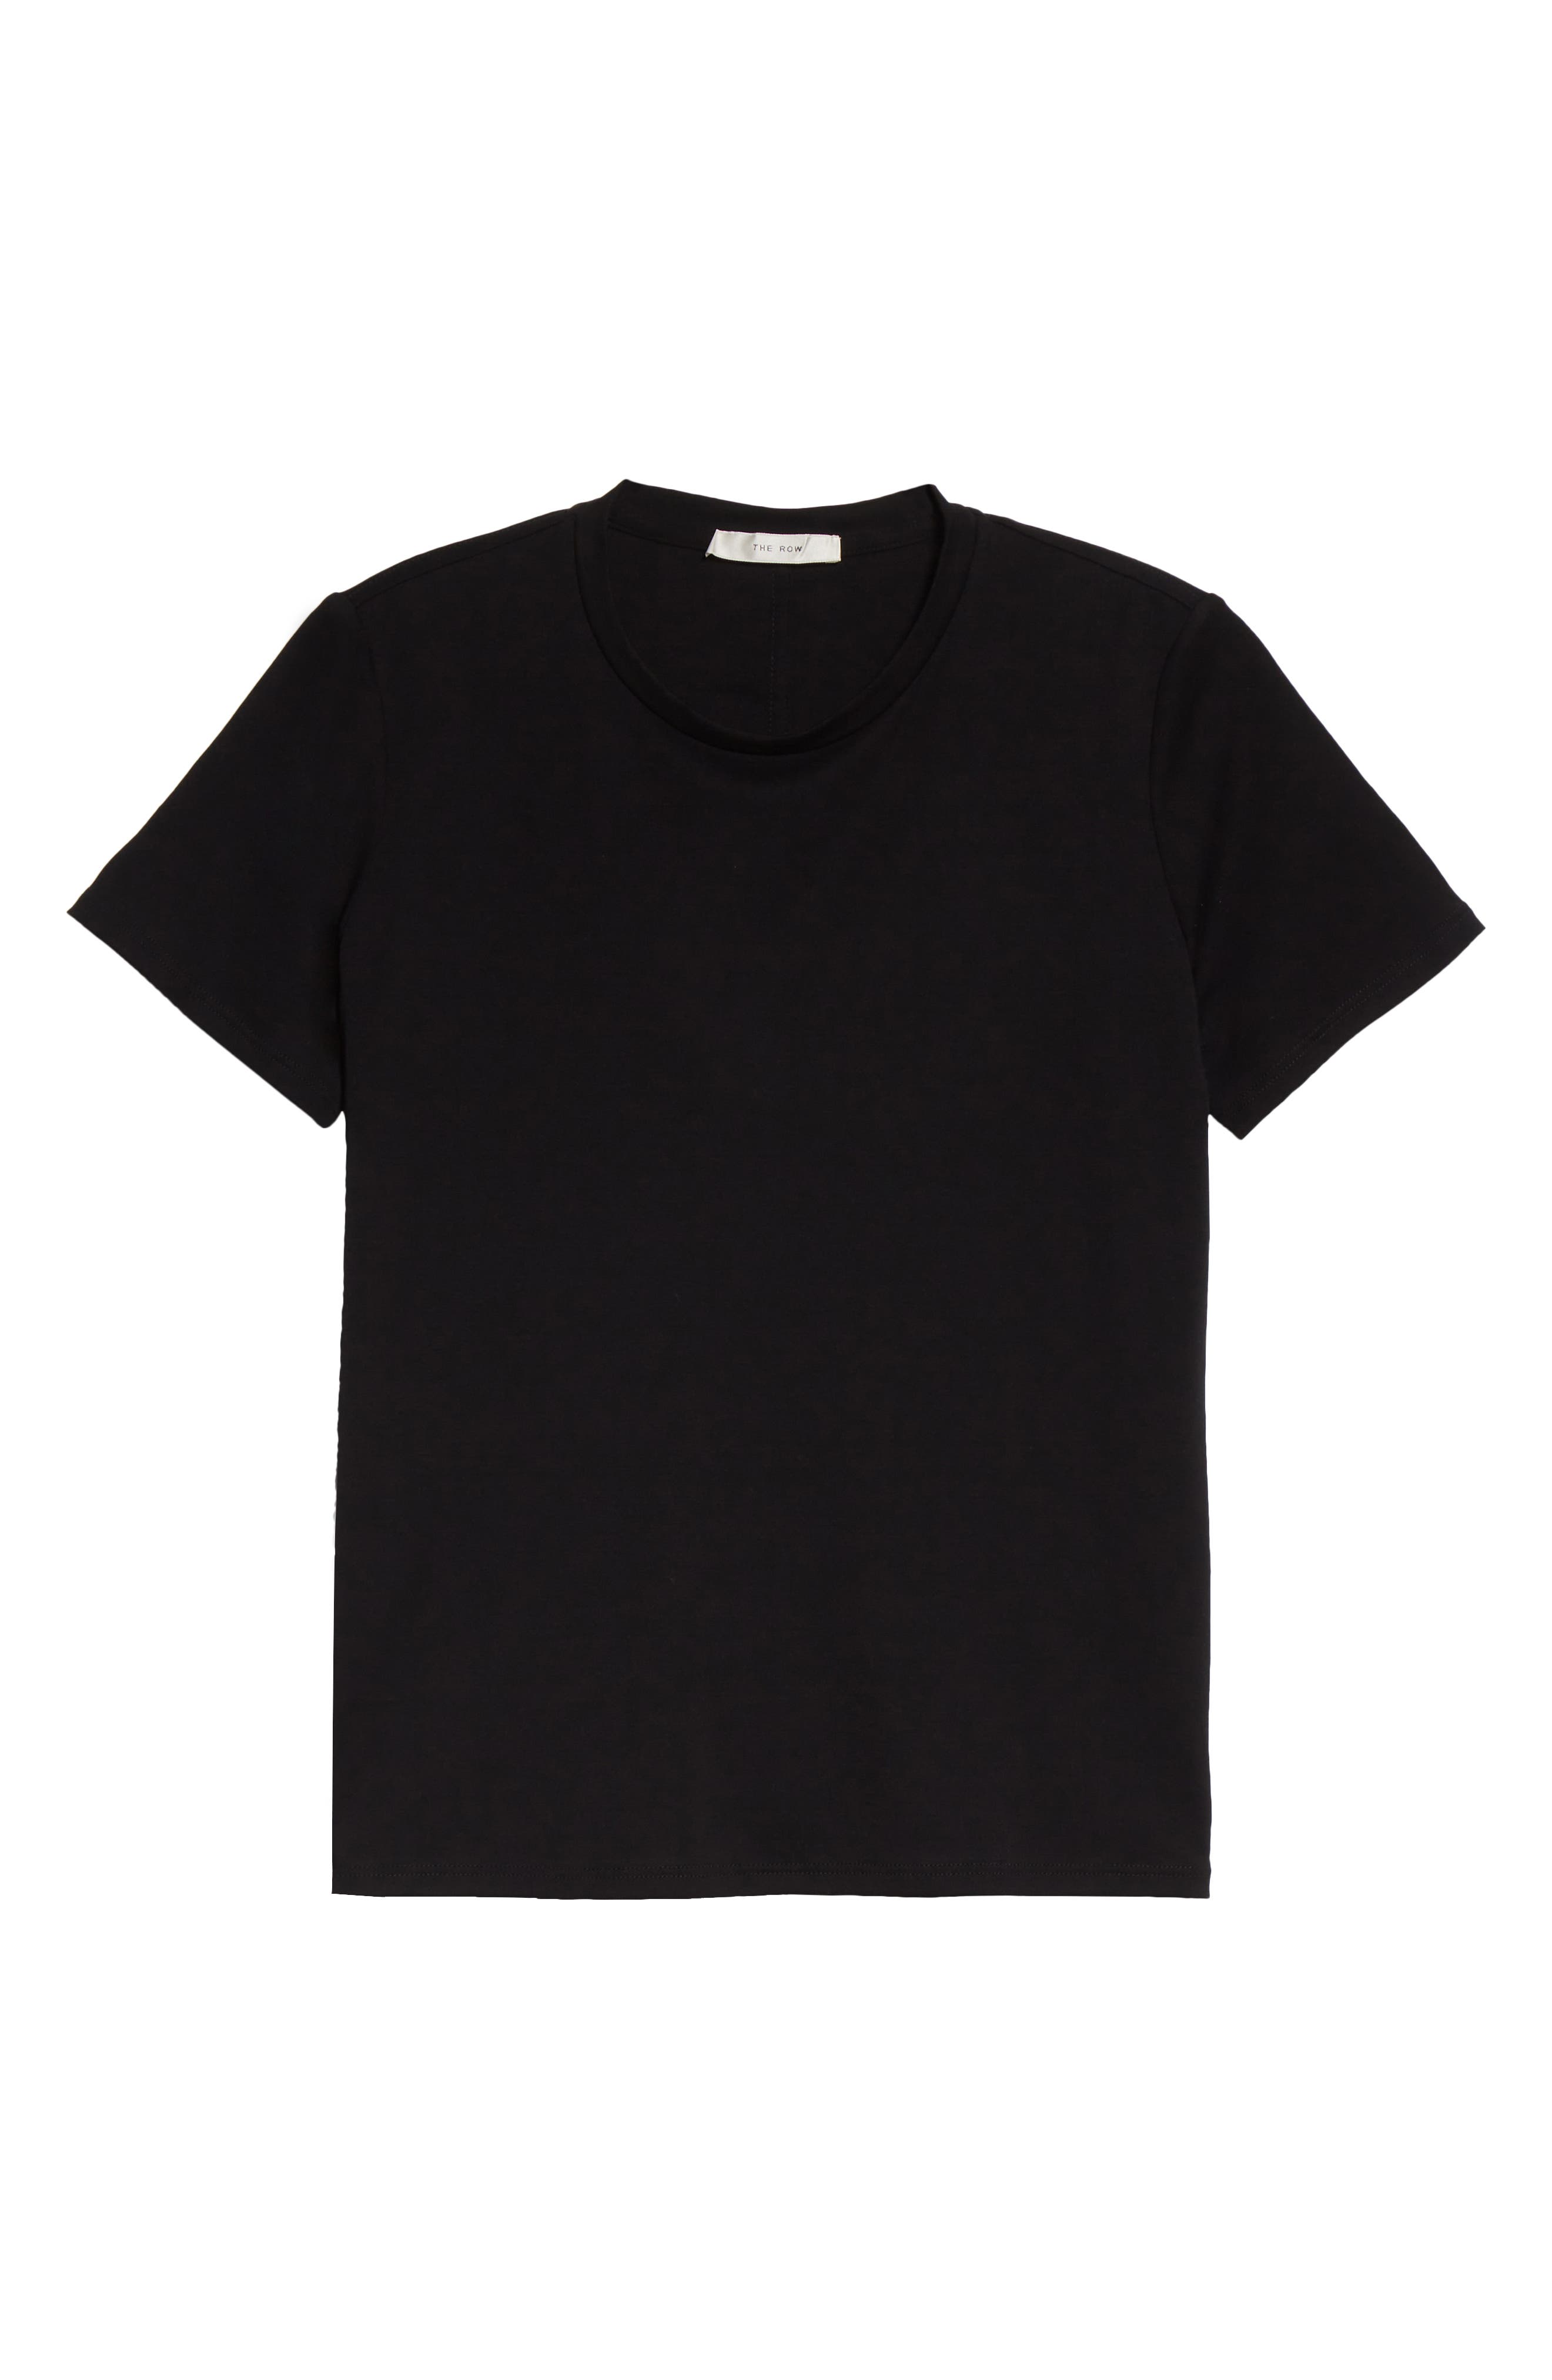 The Row Wesler Cotton Jersey T-Shirt in Blk-Black at Nordstrom, Size Medium